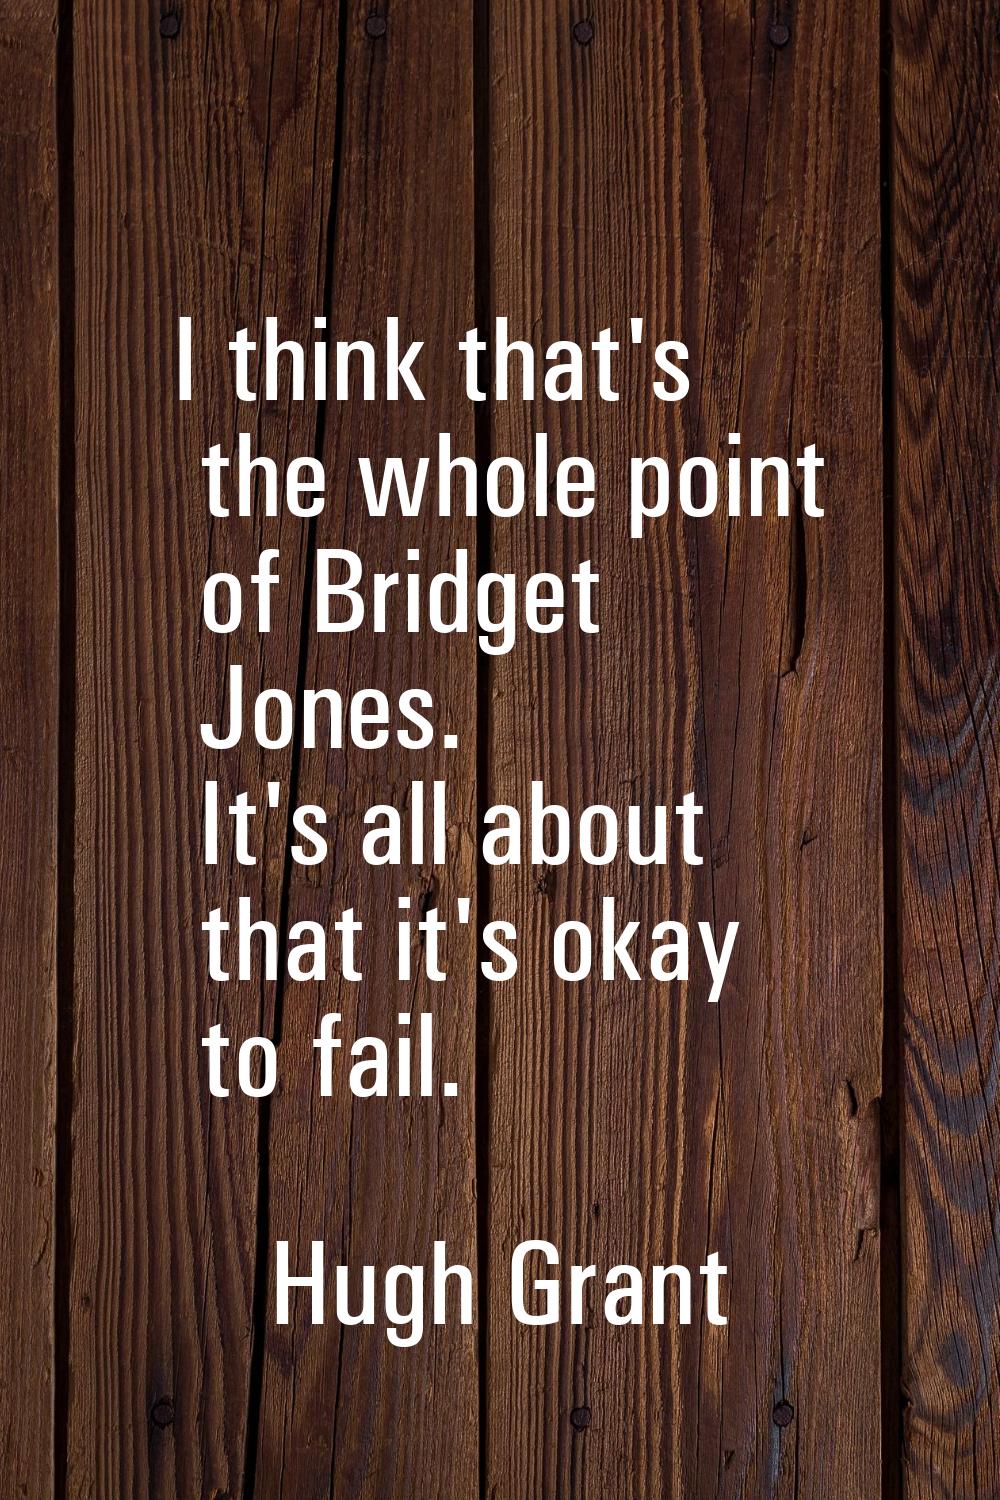 I think that's the whole point of Bridget Jones. It's all about that it's okay to fail.